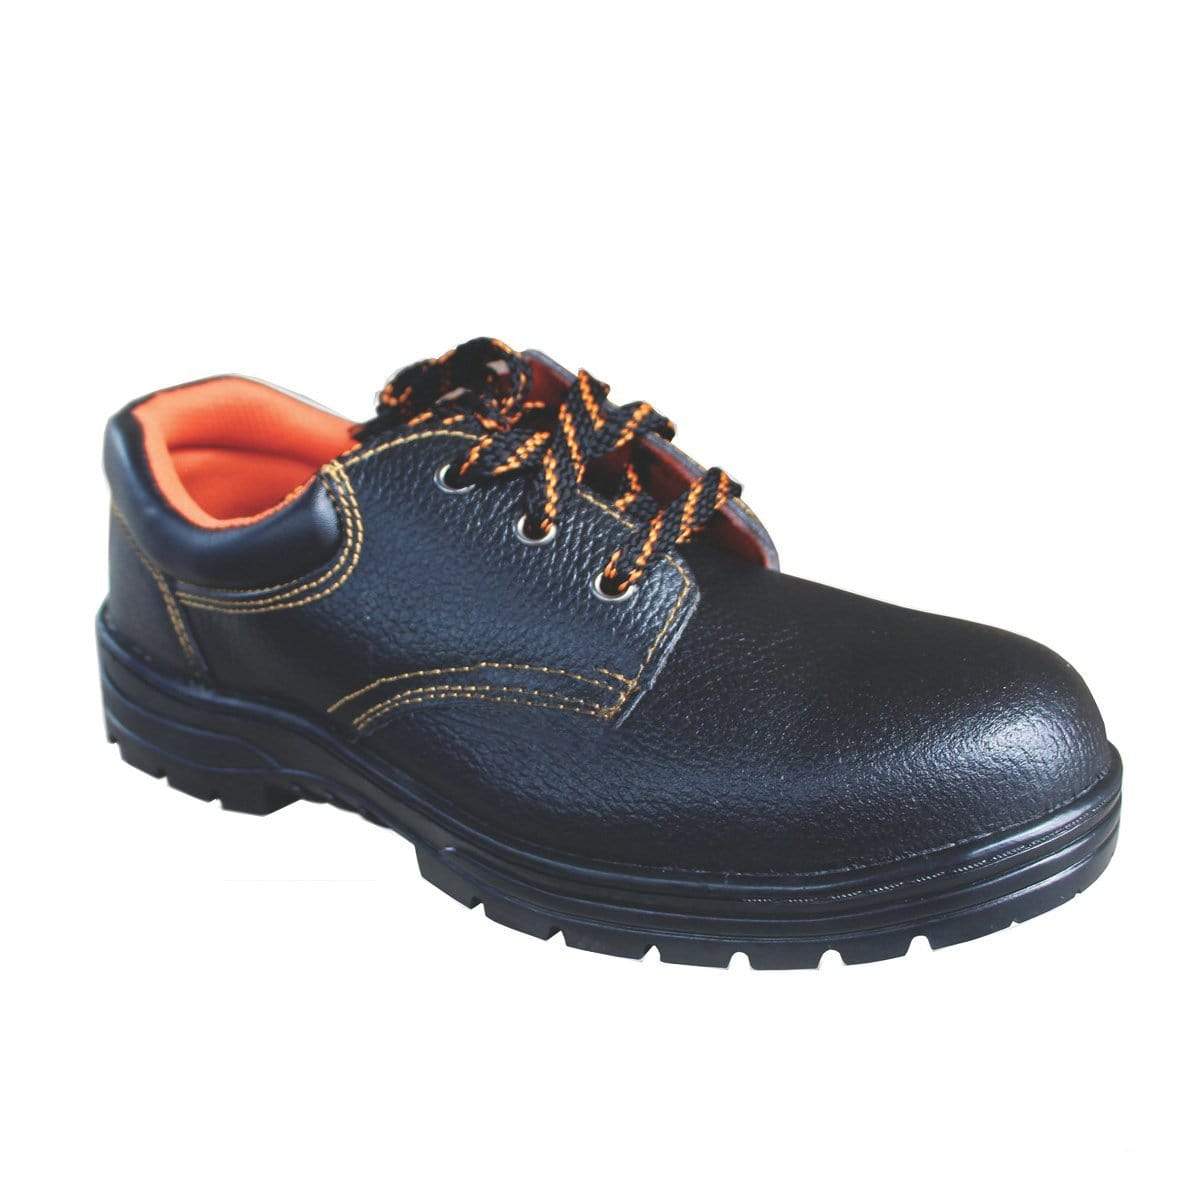 ANEKA Worker Safety Shoes Safety Boots Steel Toe Cap Kasut UK5 1000#